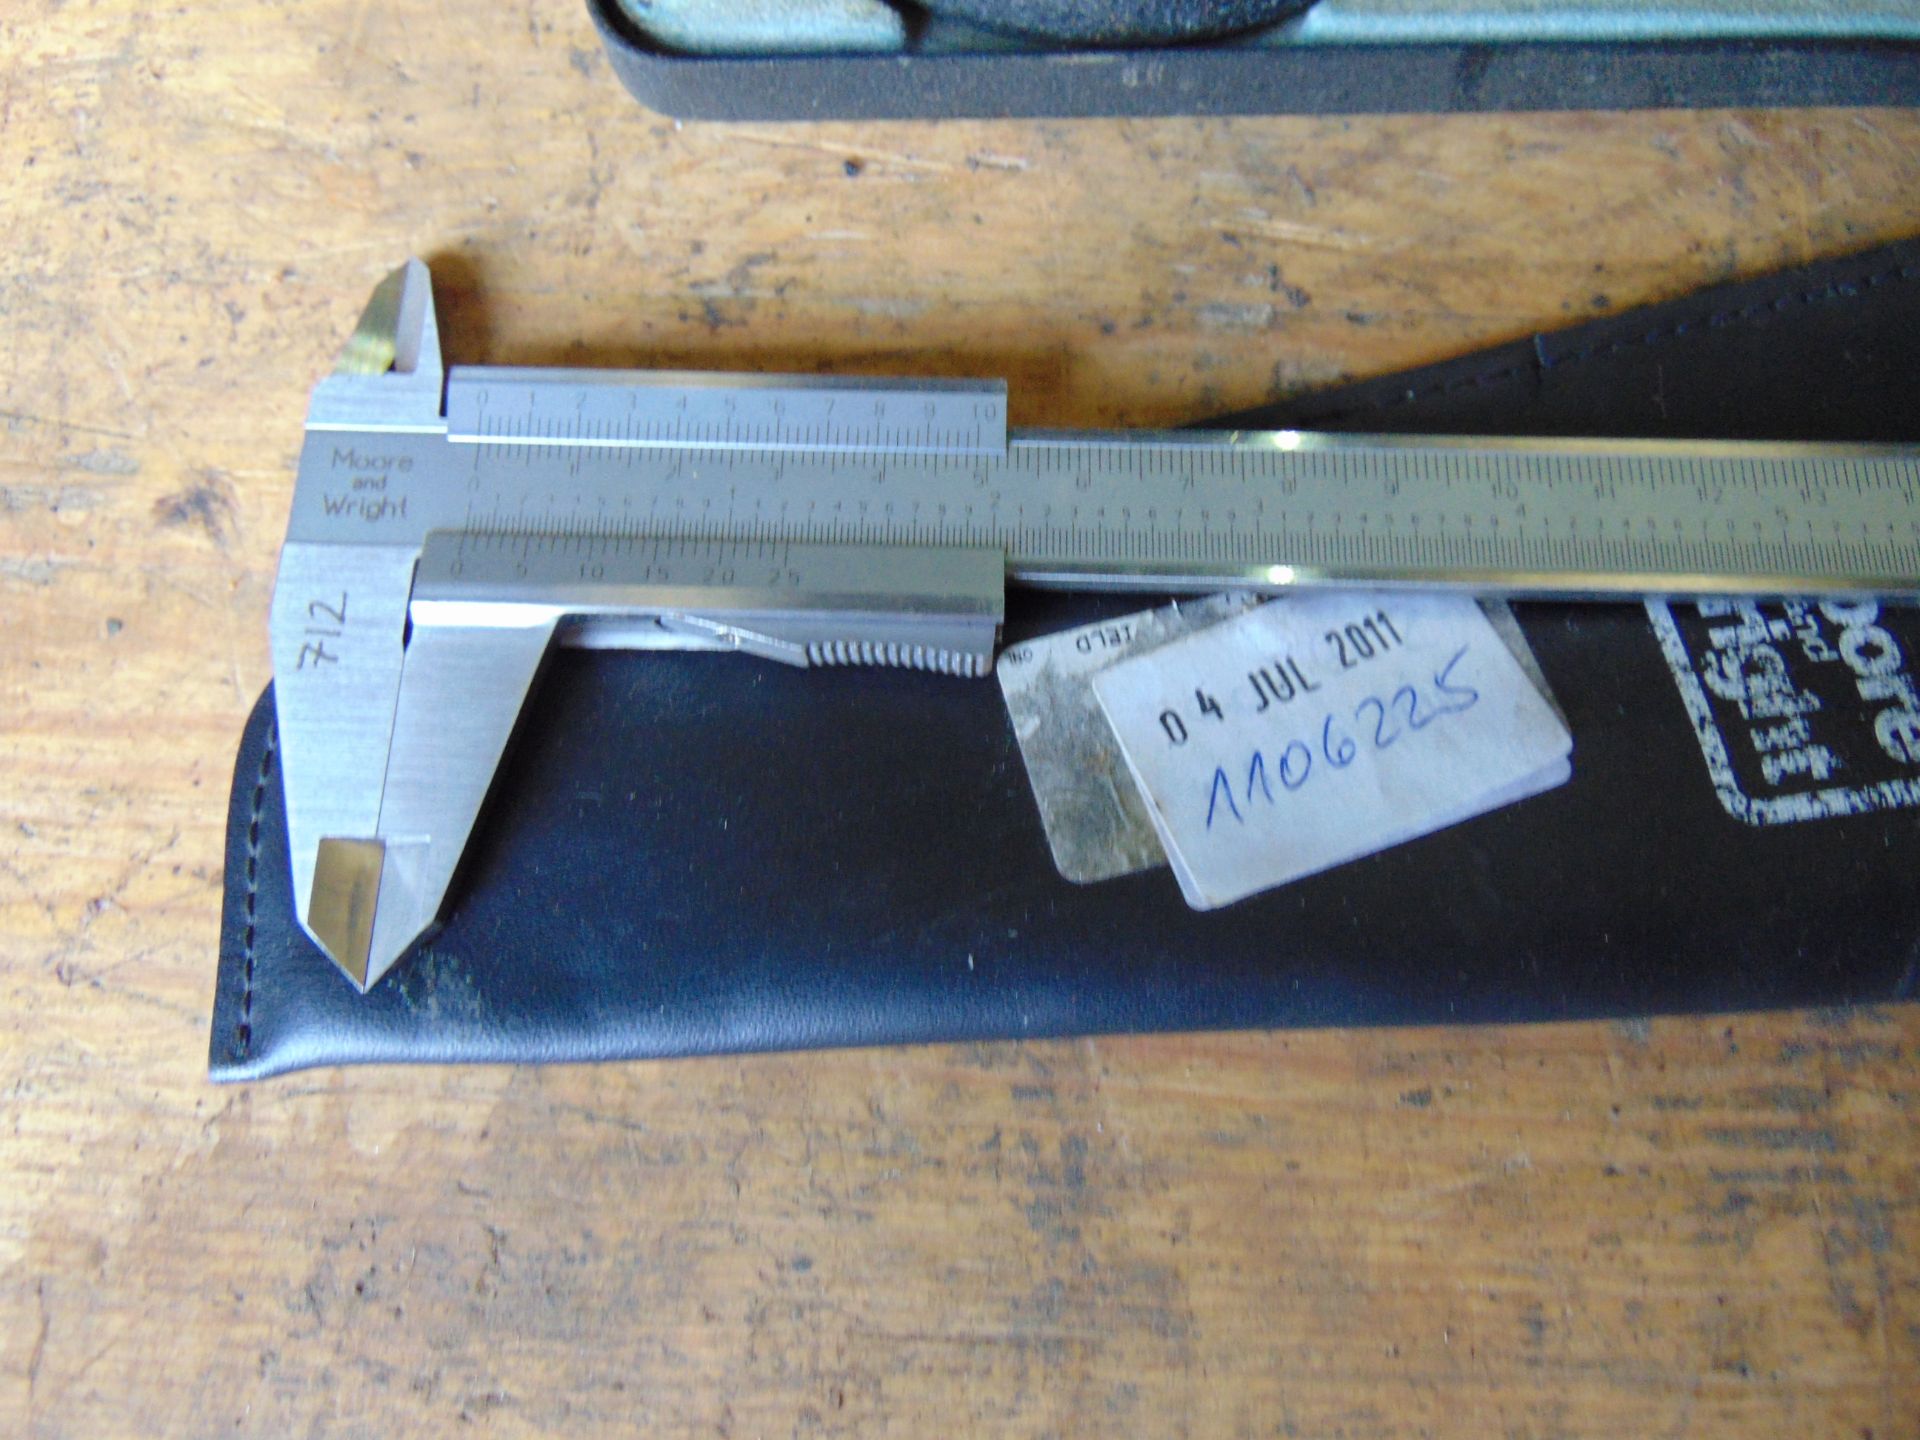 Moore and Wright Engineers Vernier Measure and Micro meter from MoD - Image 3 of 5